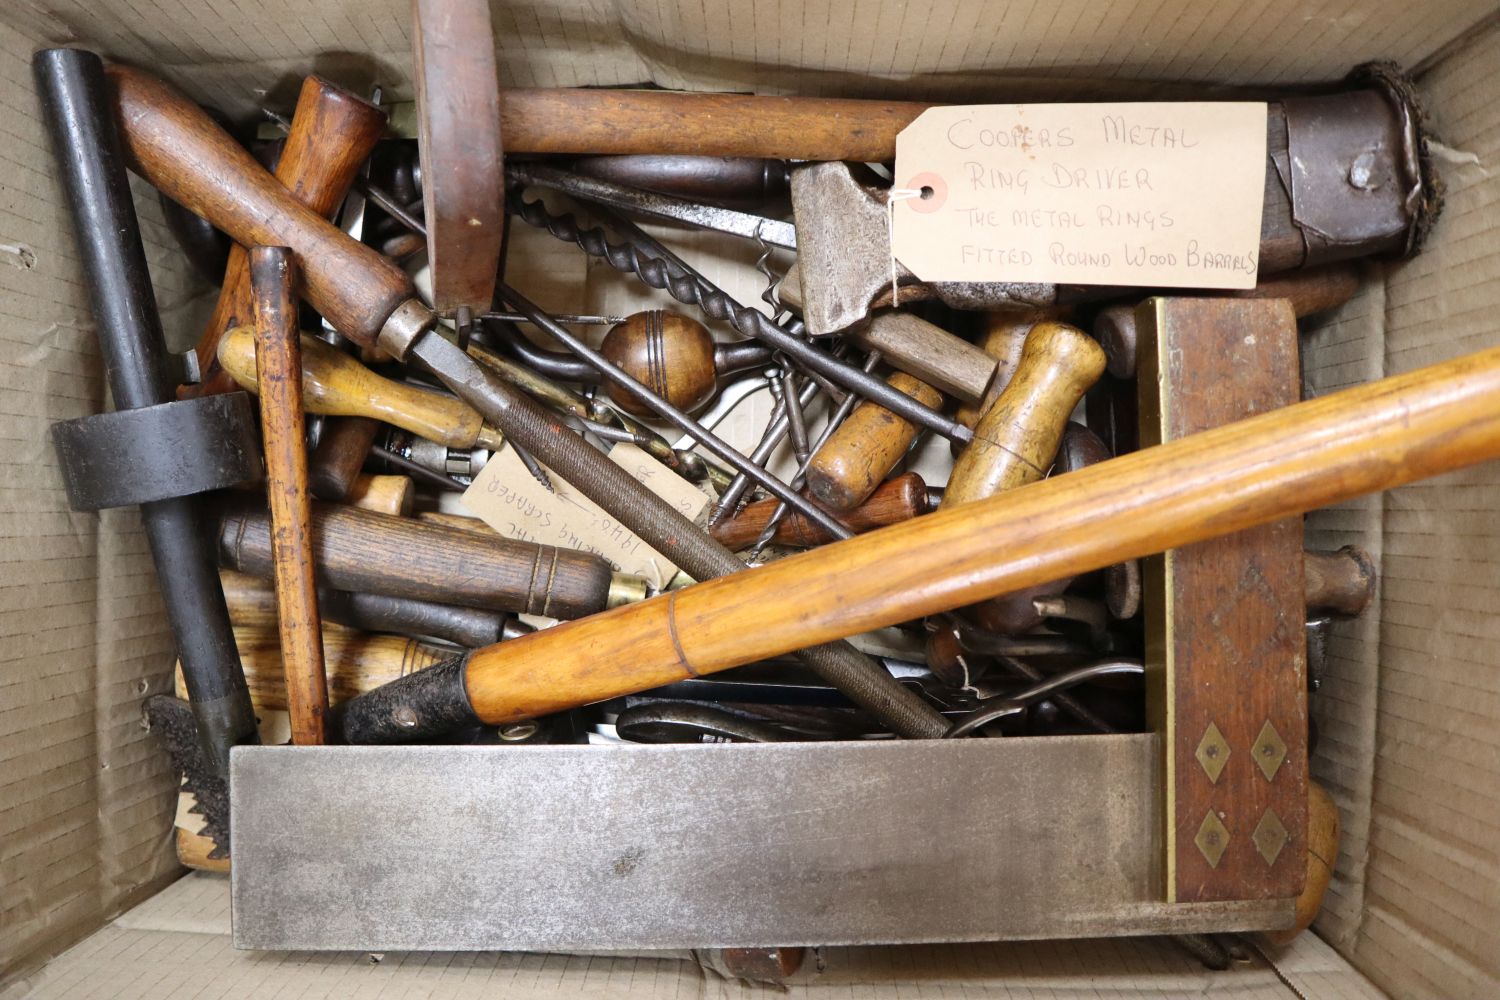 A box of assorted tools: